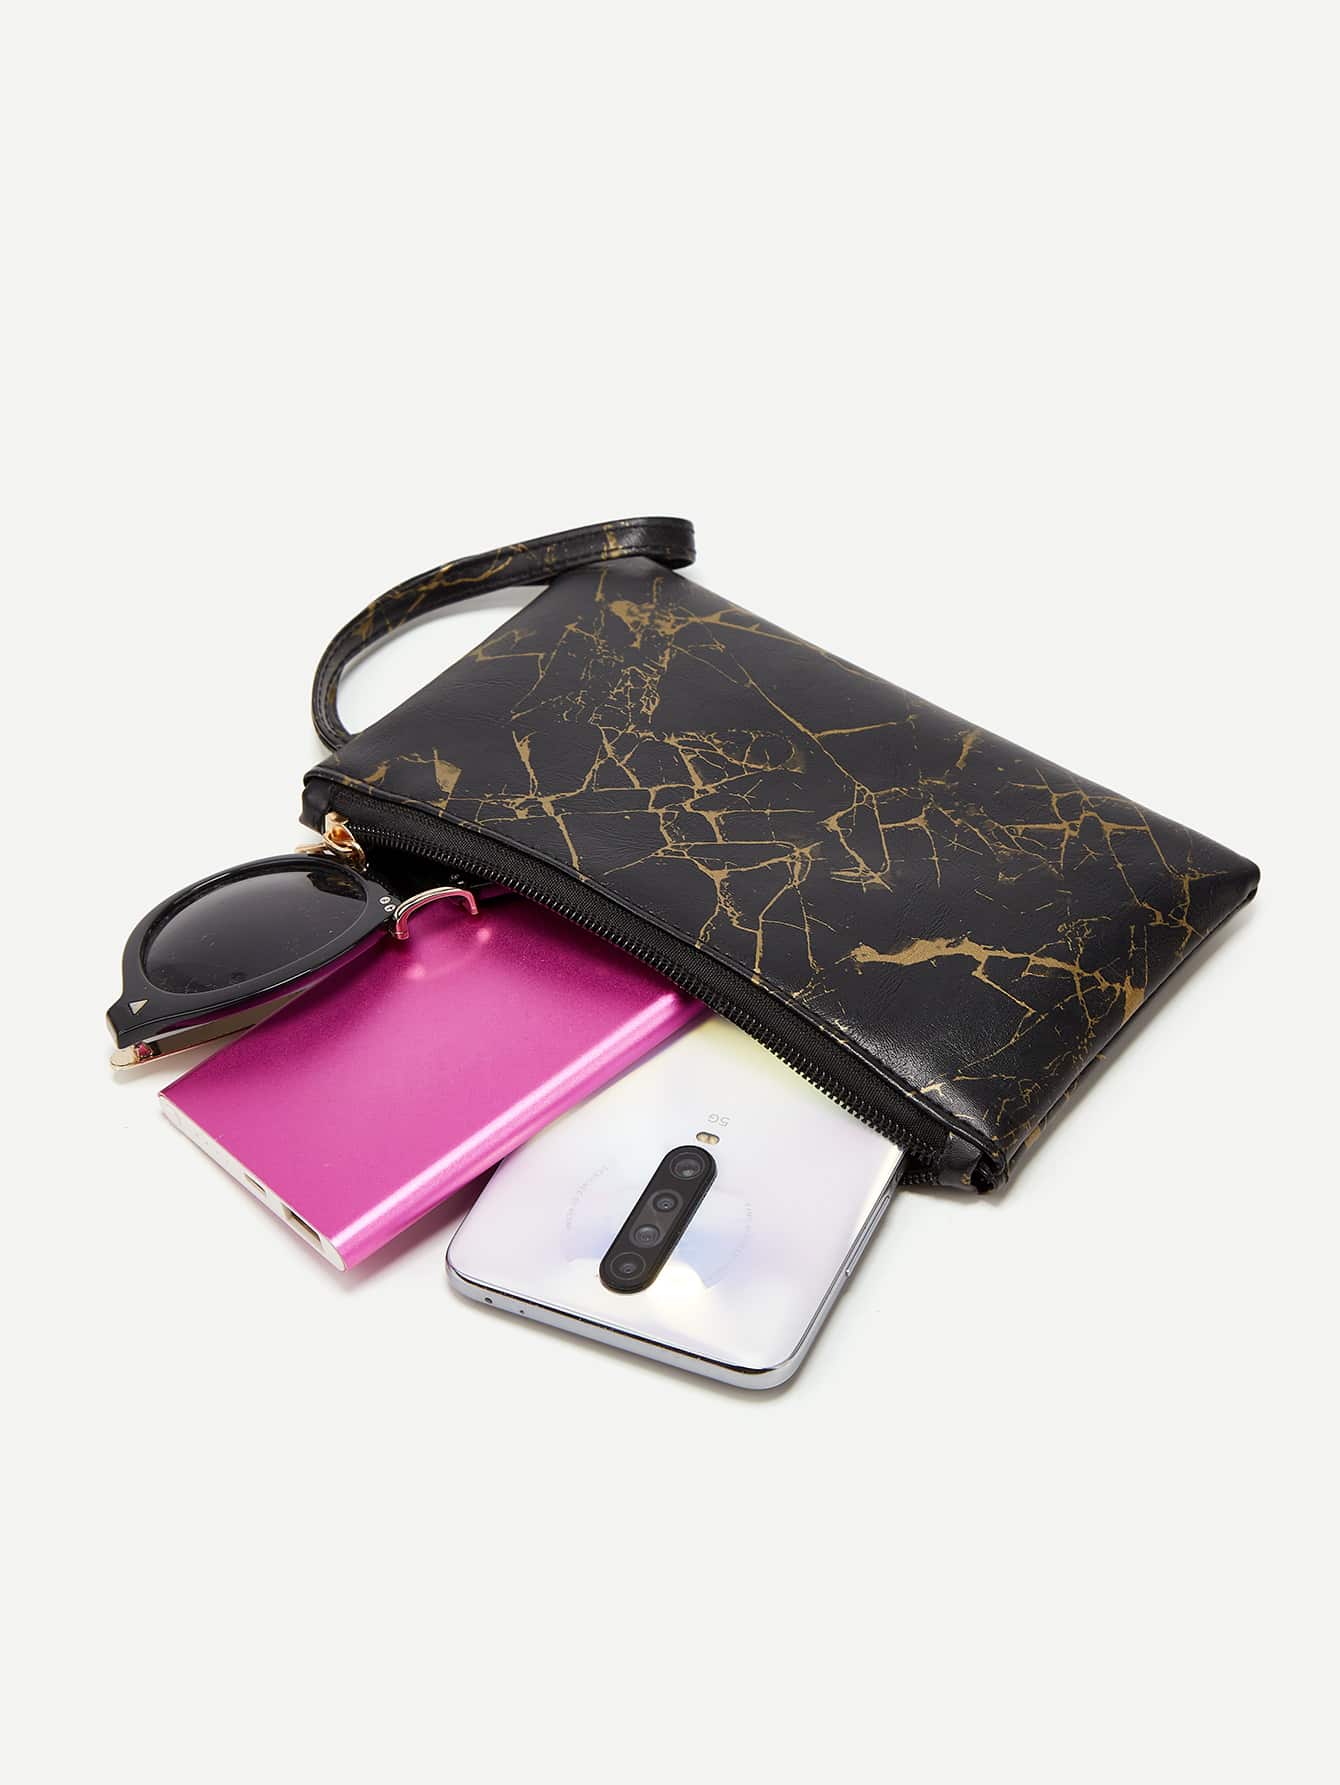 Marble Pattern Clutch Bag